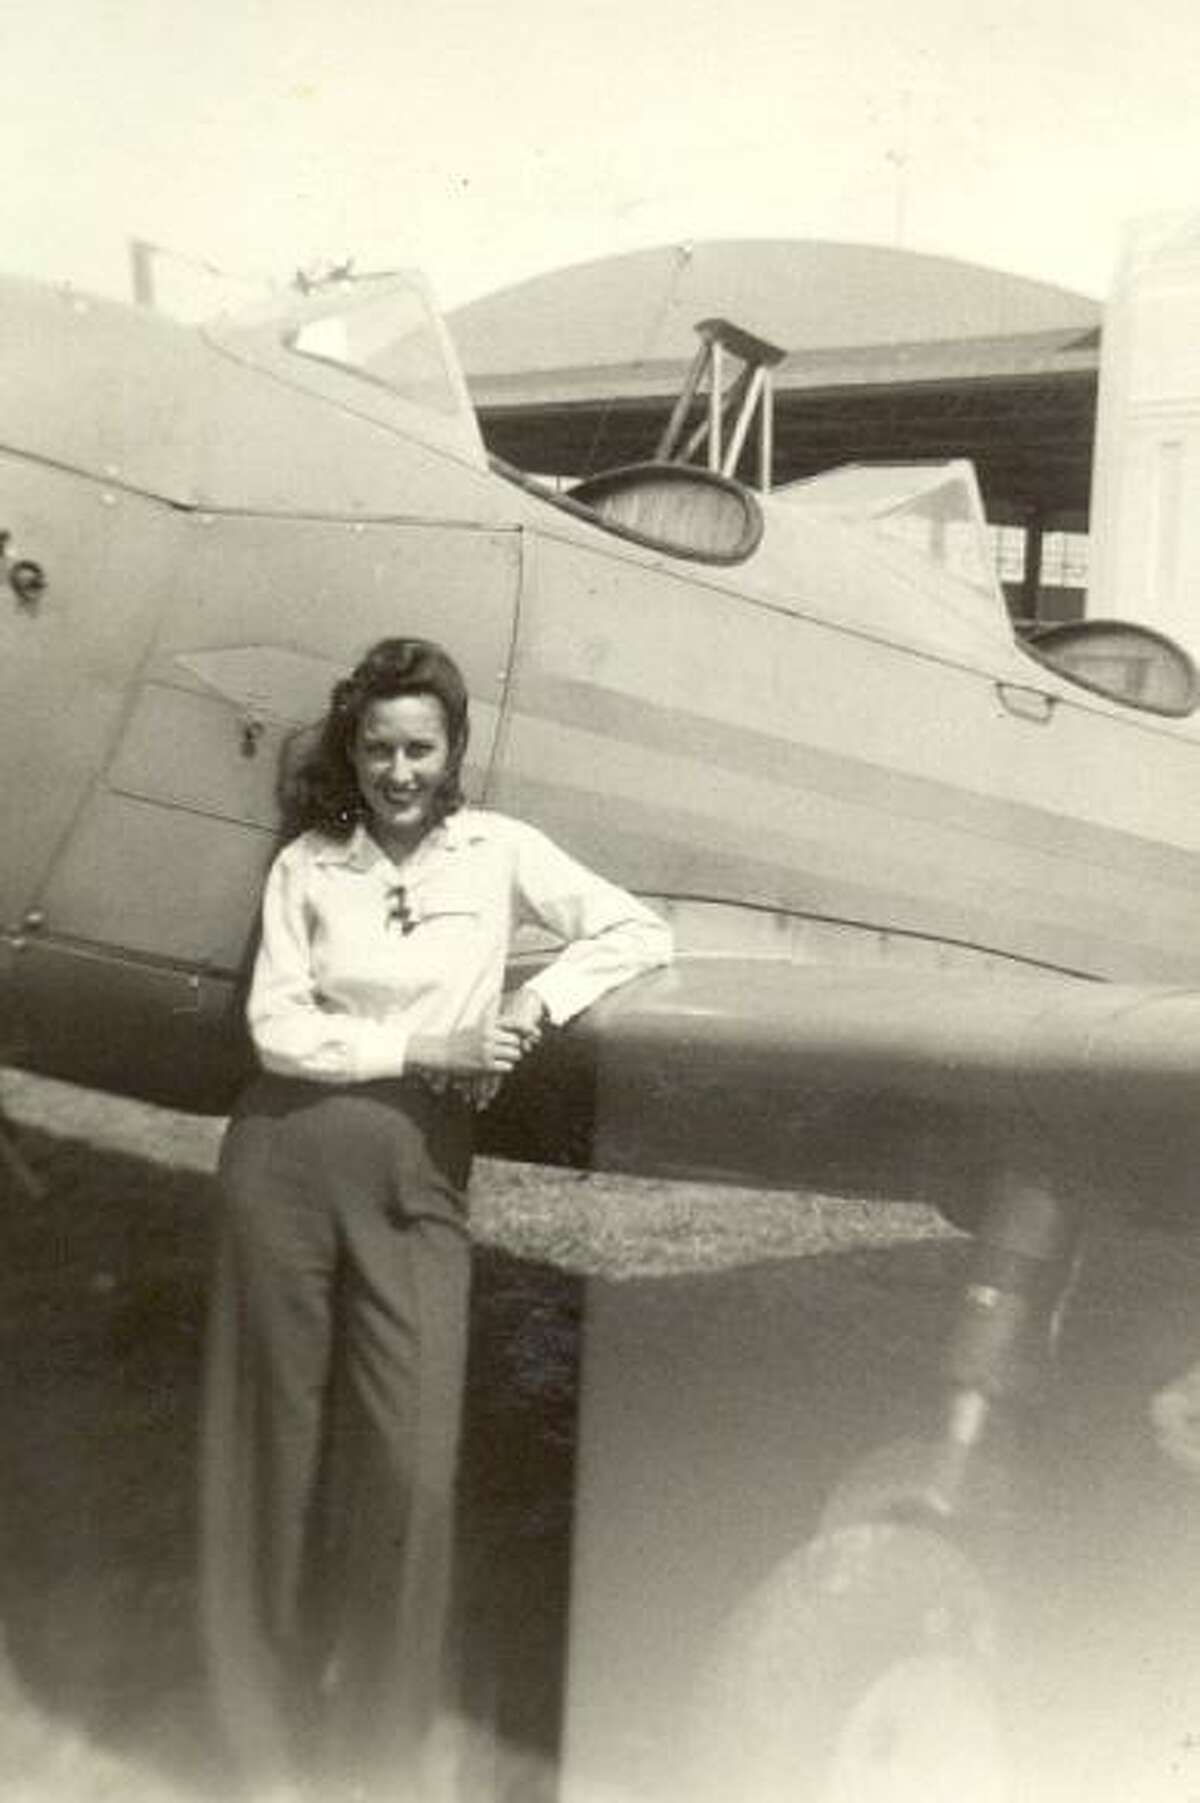 Celeste Graves at Municipal Airport (now Hobby Airport) in the 1940s.